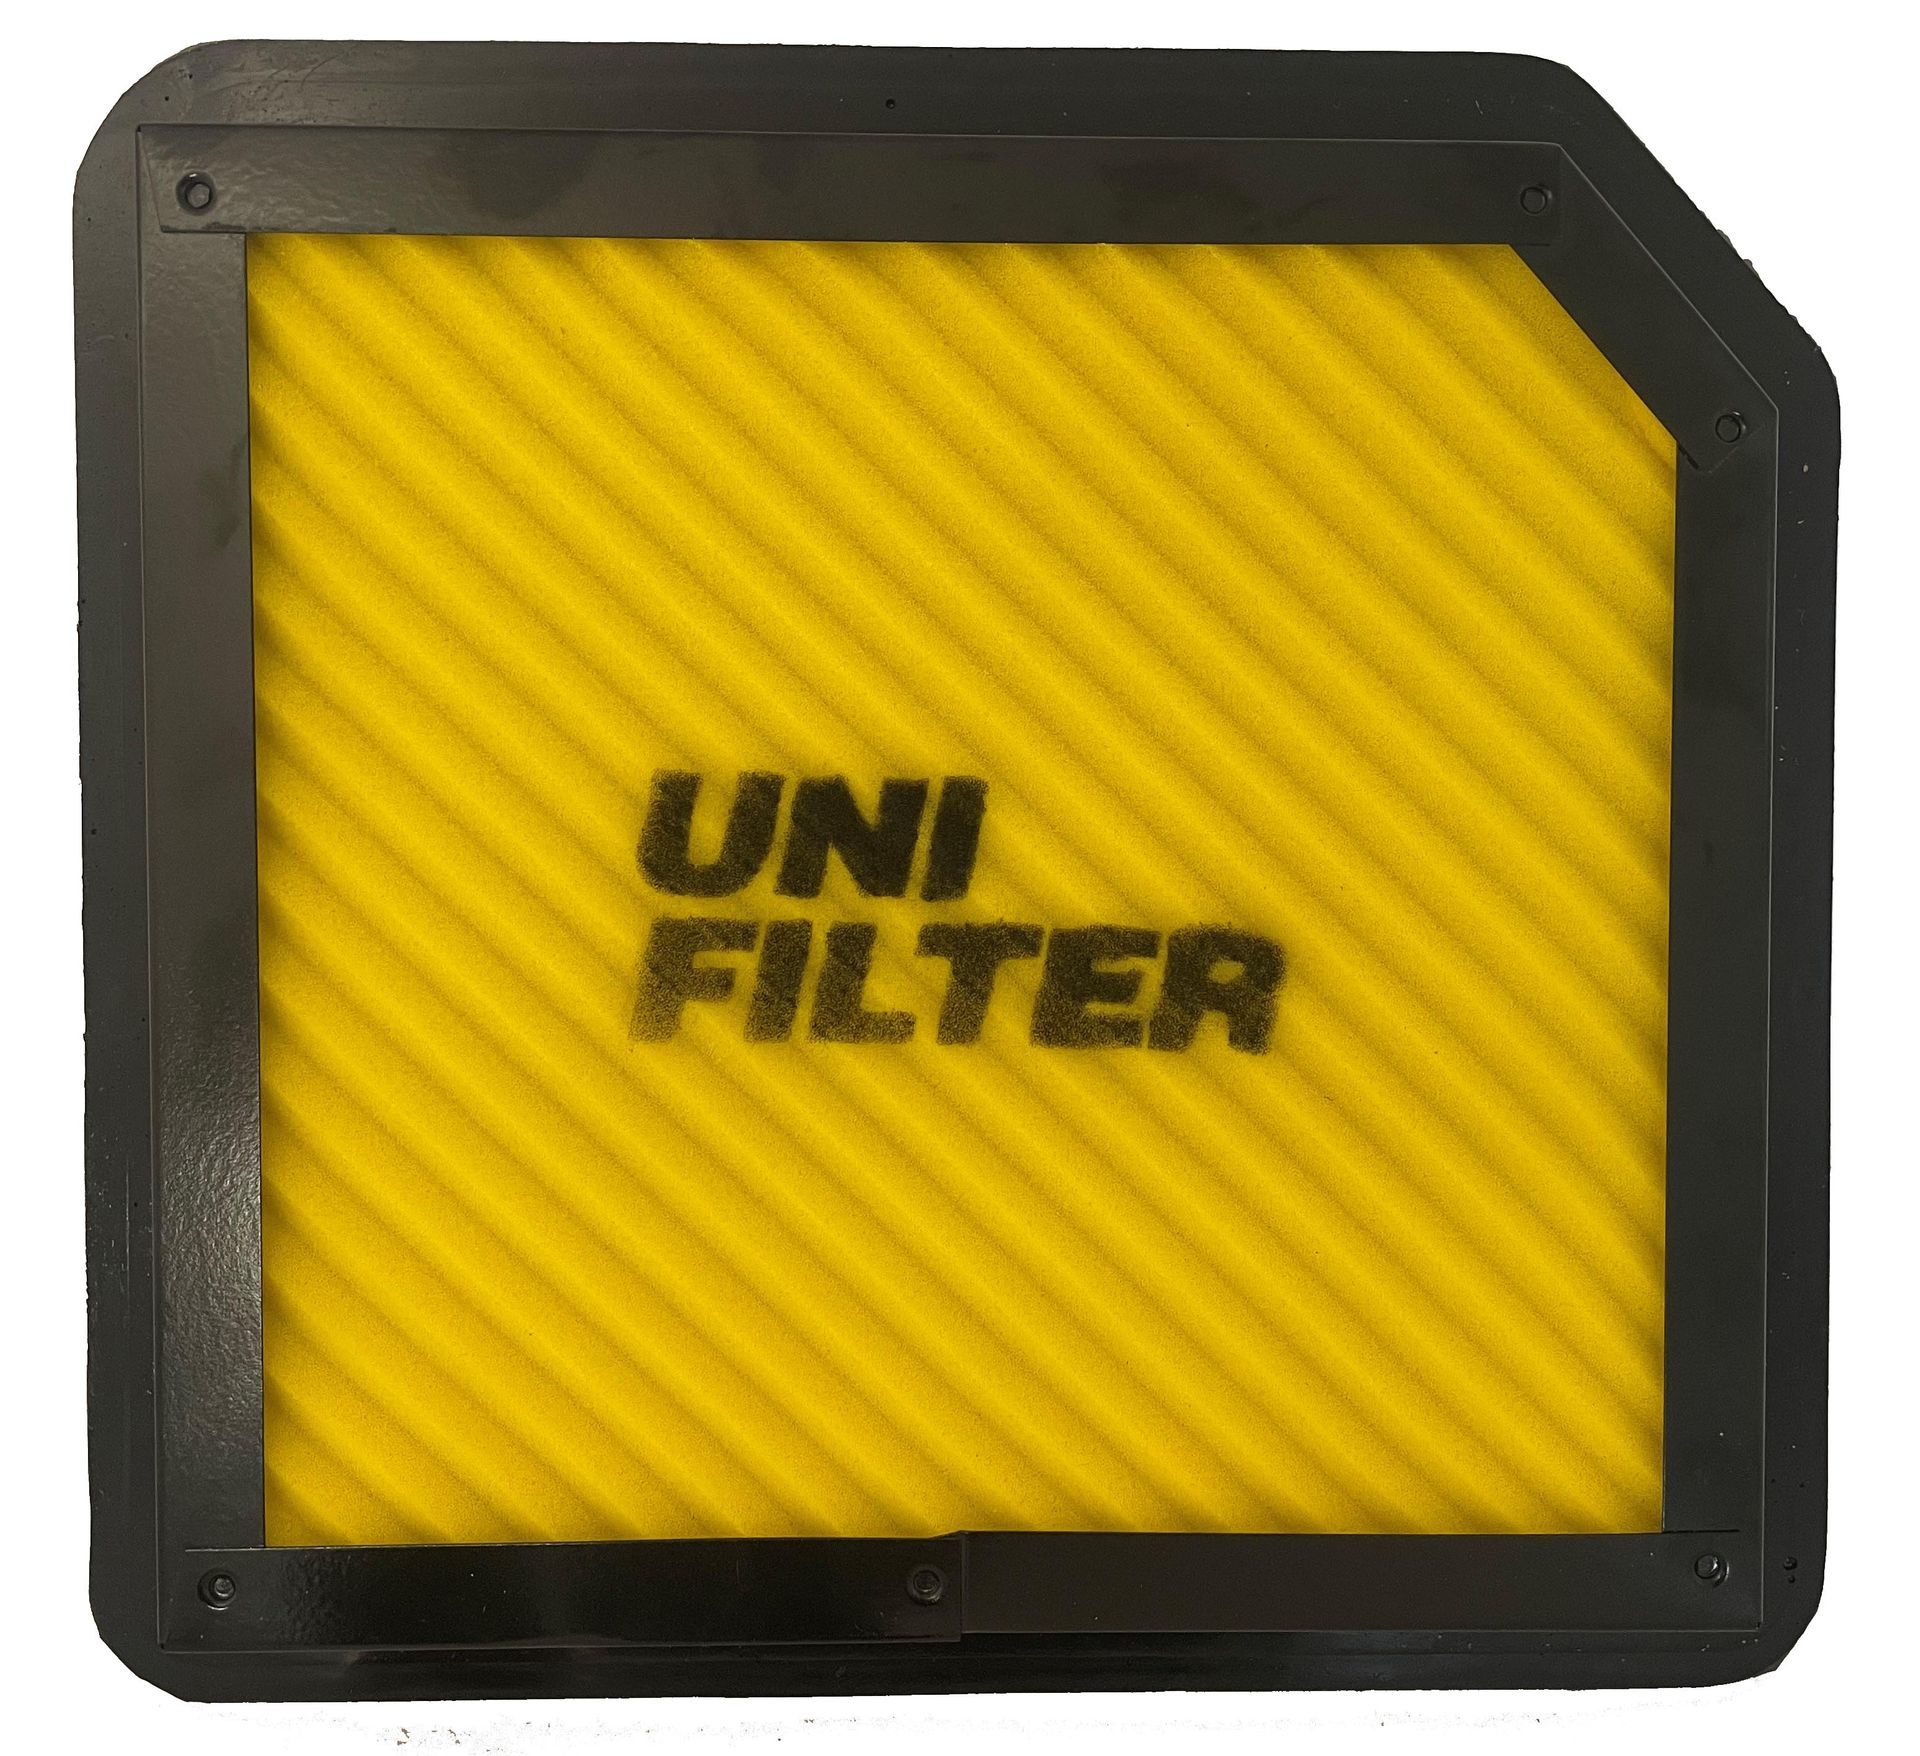 Unifilter Foam Air Filter for Nissan Patrol Y62 | Unifilter Australia